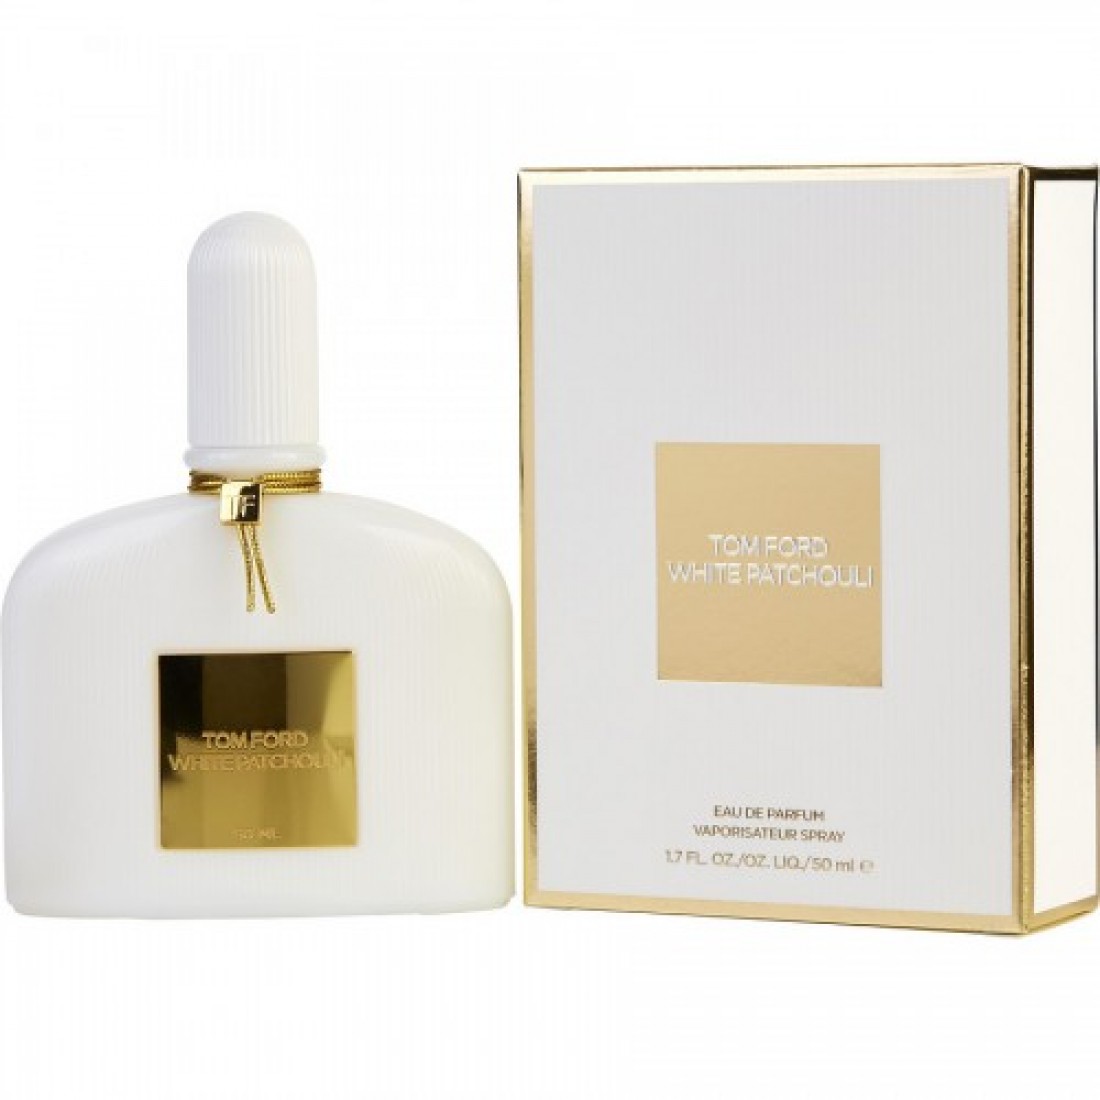 White patchouli. Tom Ford White Patchouli 100 ml. Tom Ford White Patchouli Eau de Parfum 100ml. Tom Ford White Patchouli 100ml EDP. Tom Ford White Patchouli 50 мл.